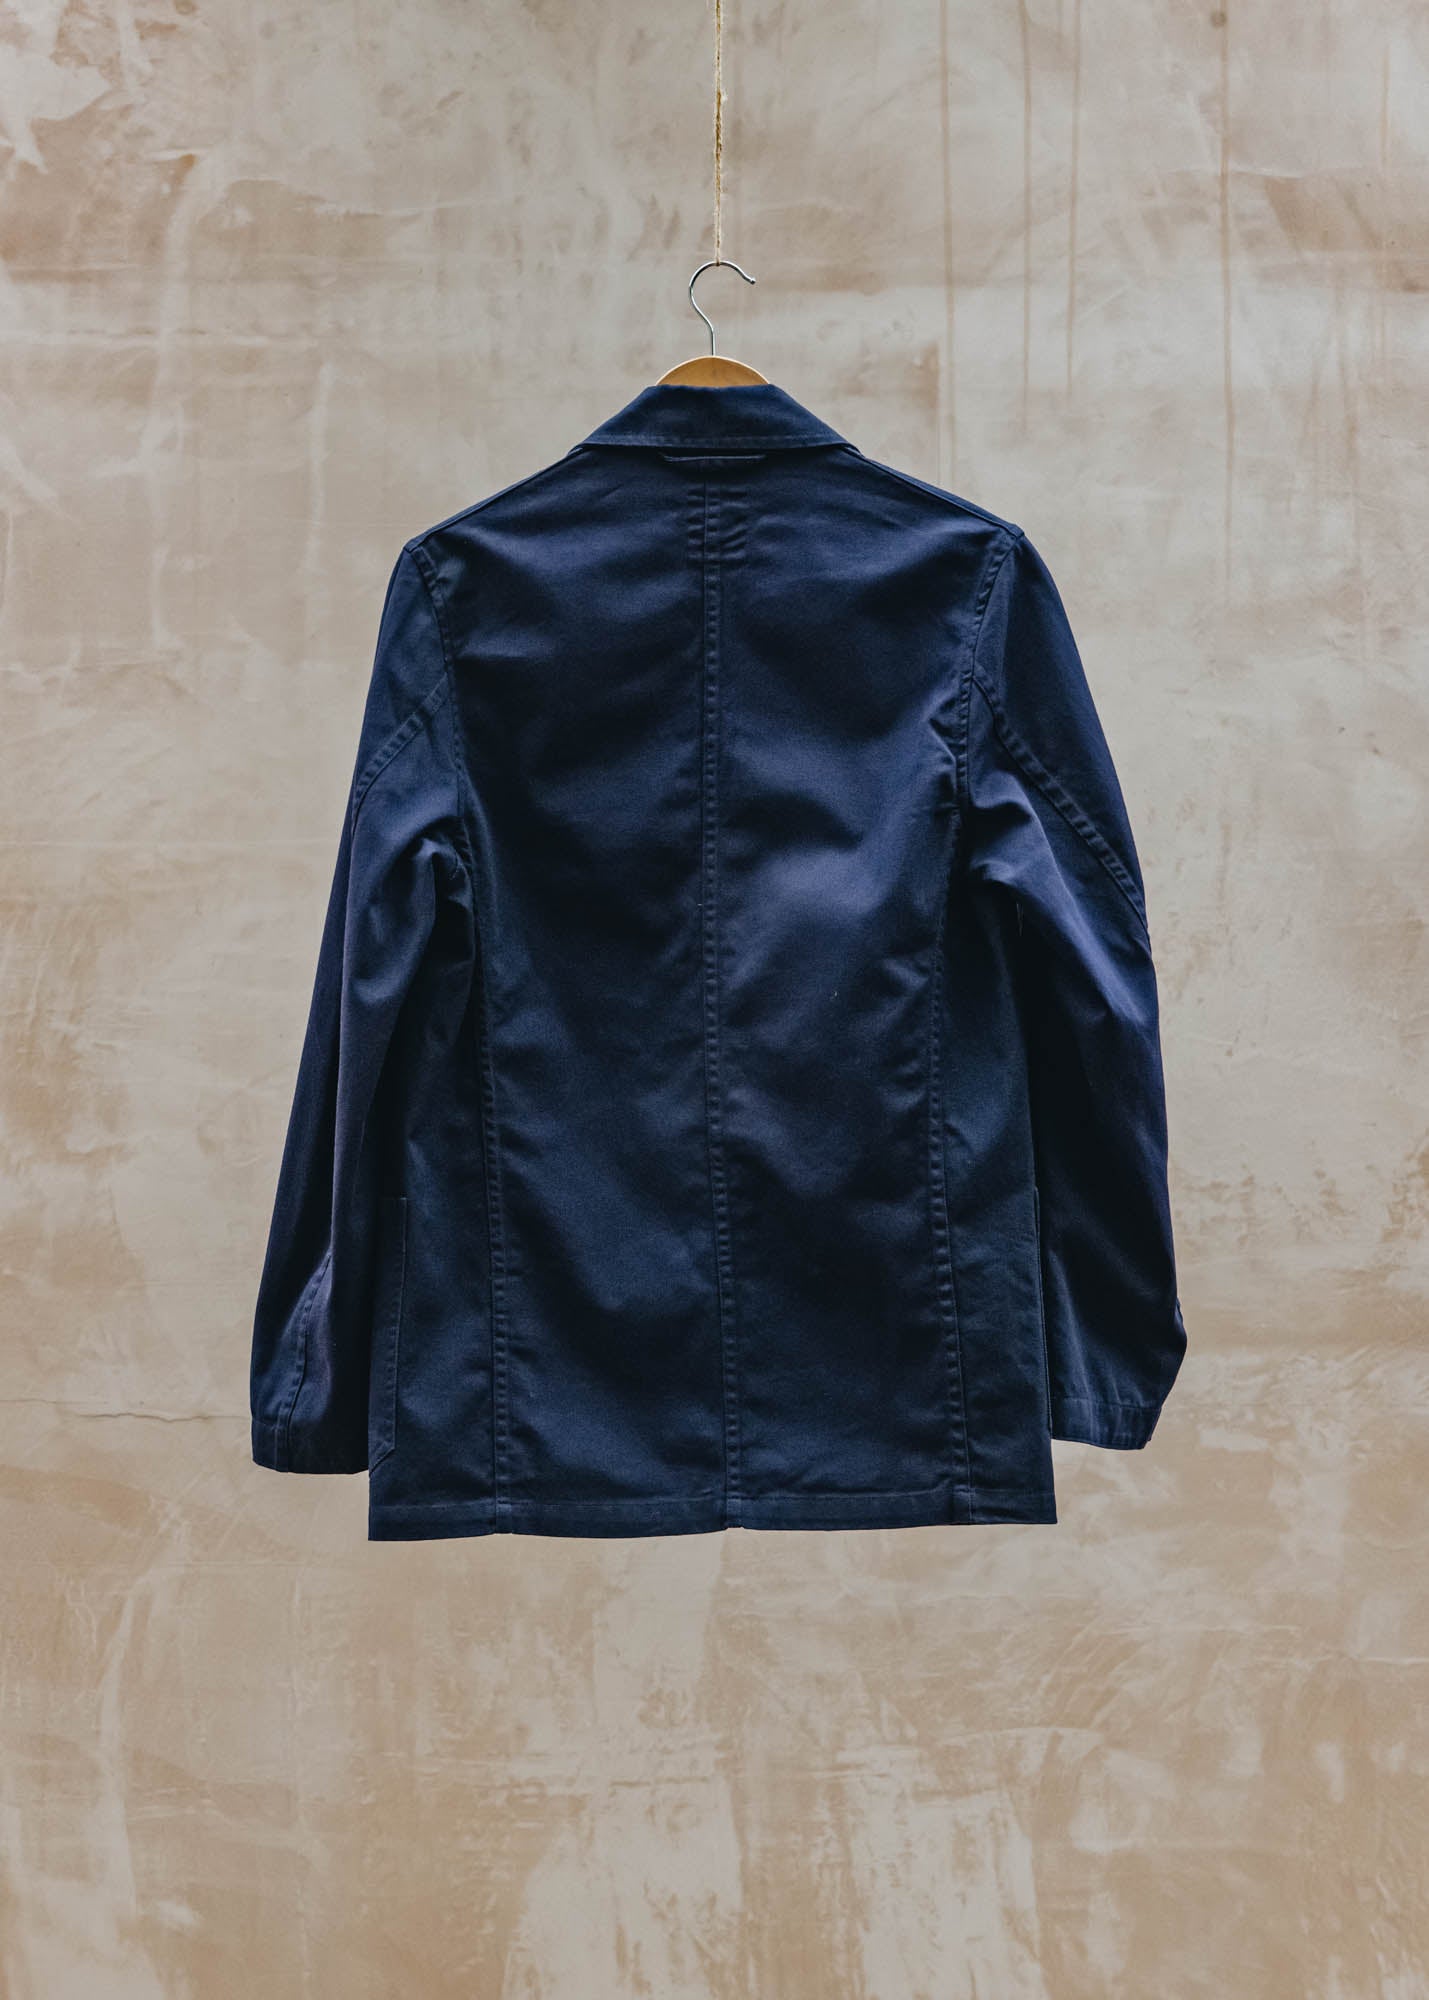 Yarmouth Oilskins Engineers Jacket in Navy